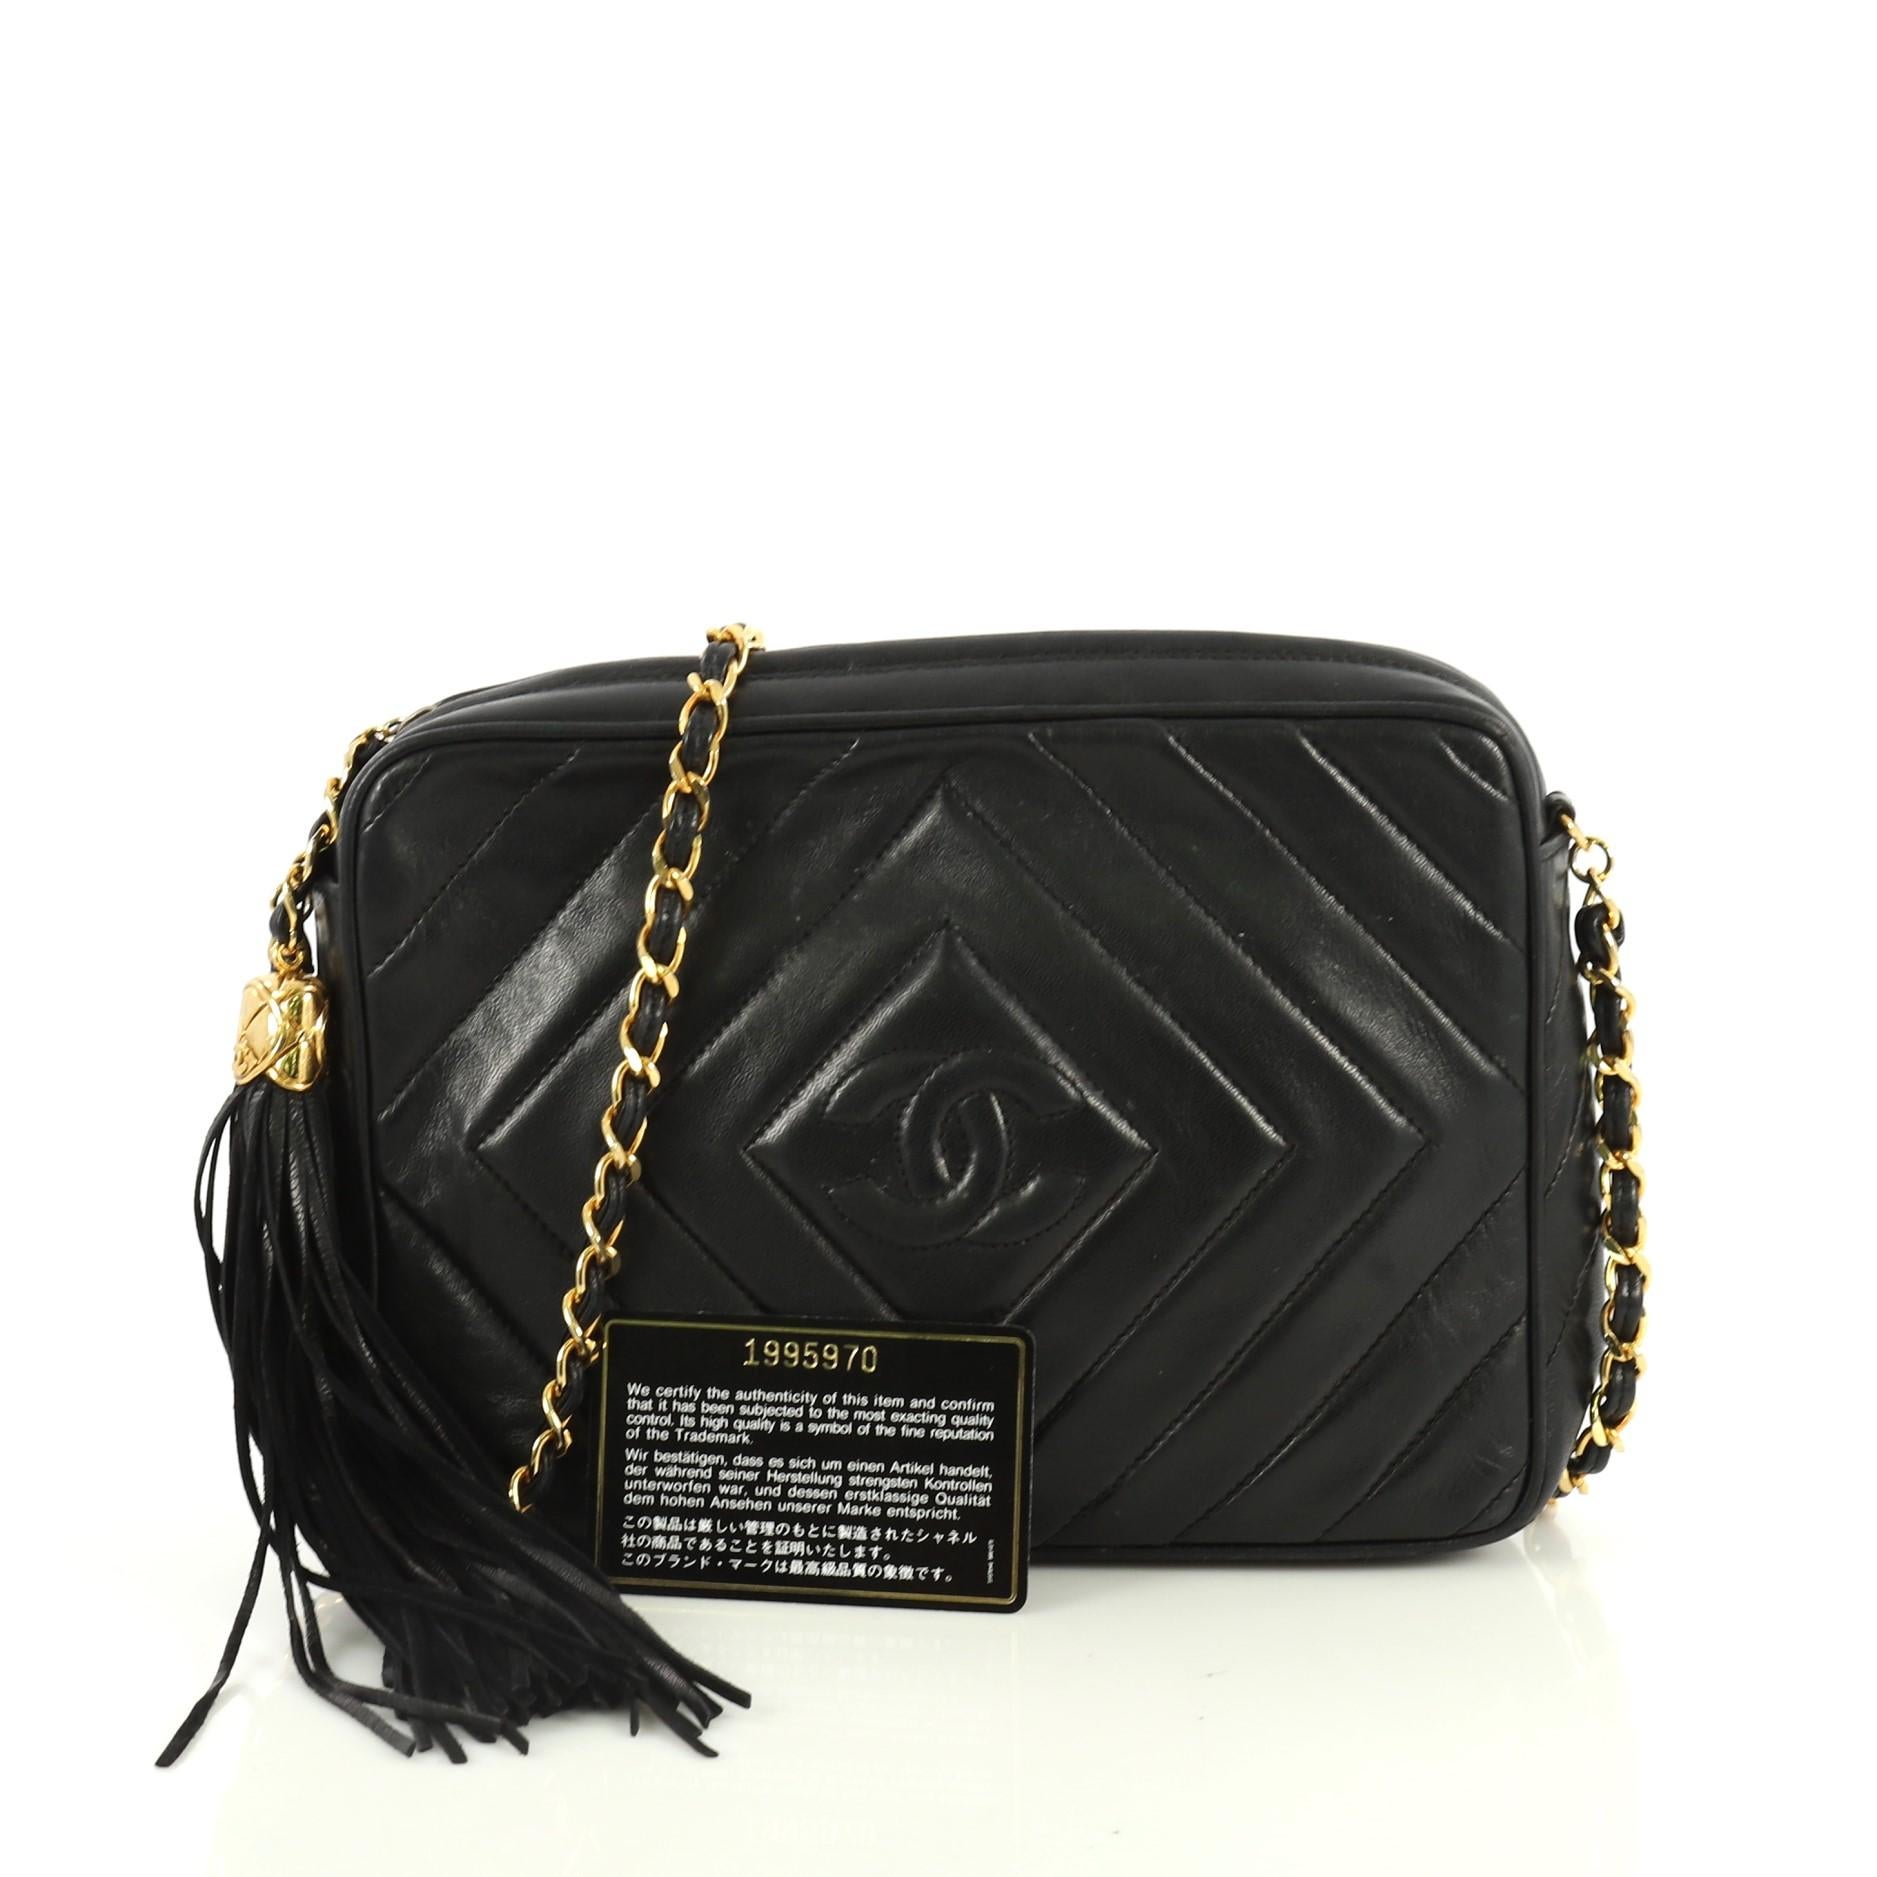 This Chanel Vintage Camera Tassel Bag Chevron Lambskin Small, crafted from black chevron lambskin leather, features woven-in leather chain link strap, leather tassel zipper pull, and gold-tone hardware. Its zip closure opens to a black leather